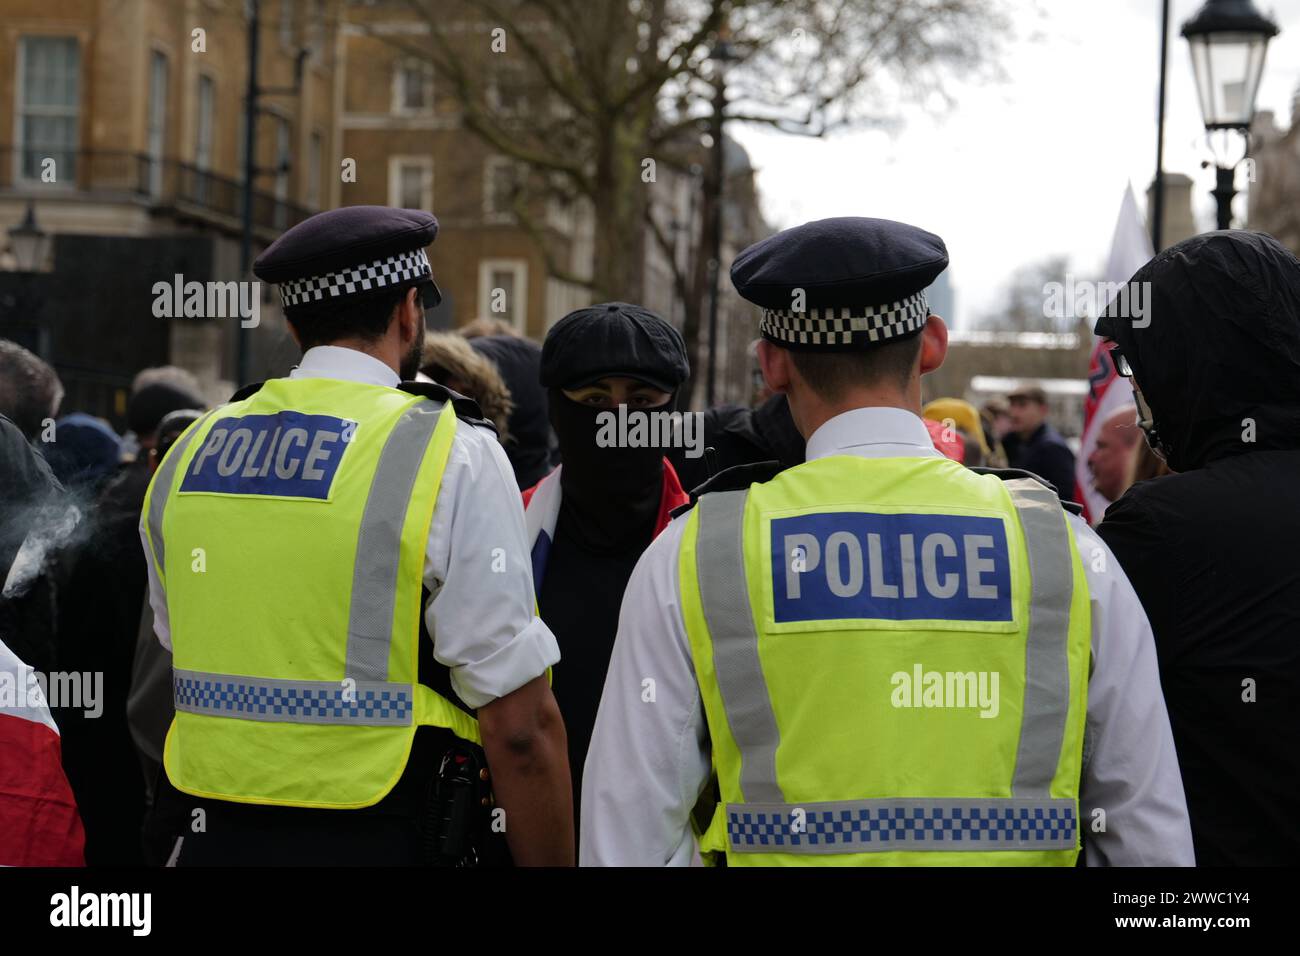 London, UK. 23 MAR 2024. People gathered outside Downing Street to listen to speeches and protest about reclaiming British values. Alamy Live News / Aubrey Fagon Credit: Aubrey Fagon/Alamy Live News Credit: Aubrey Fagon/Alamy Live News Stock Photo